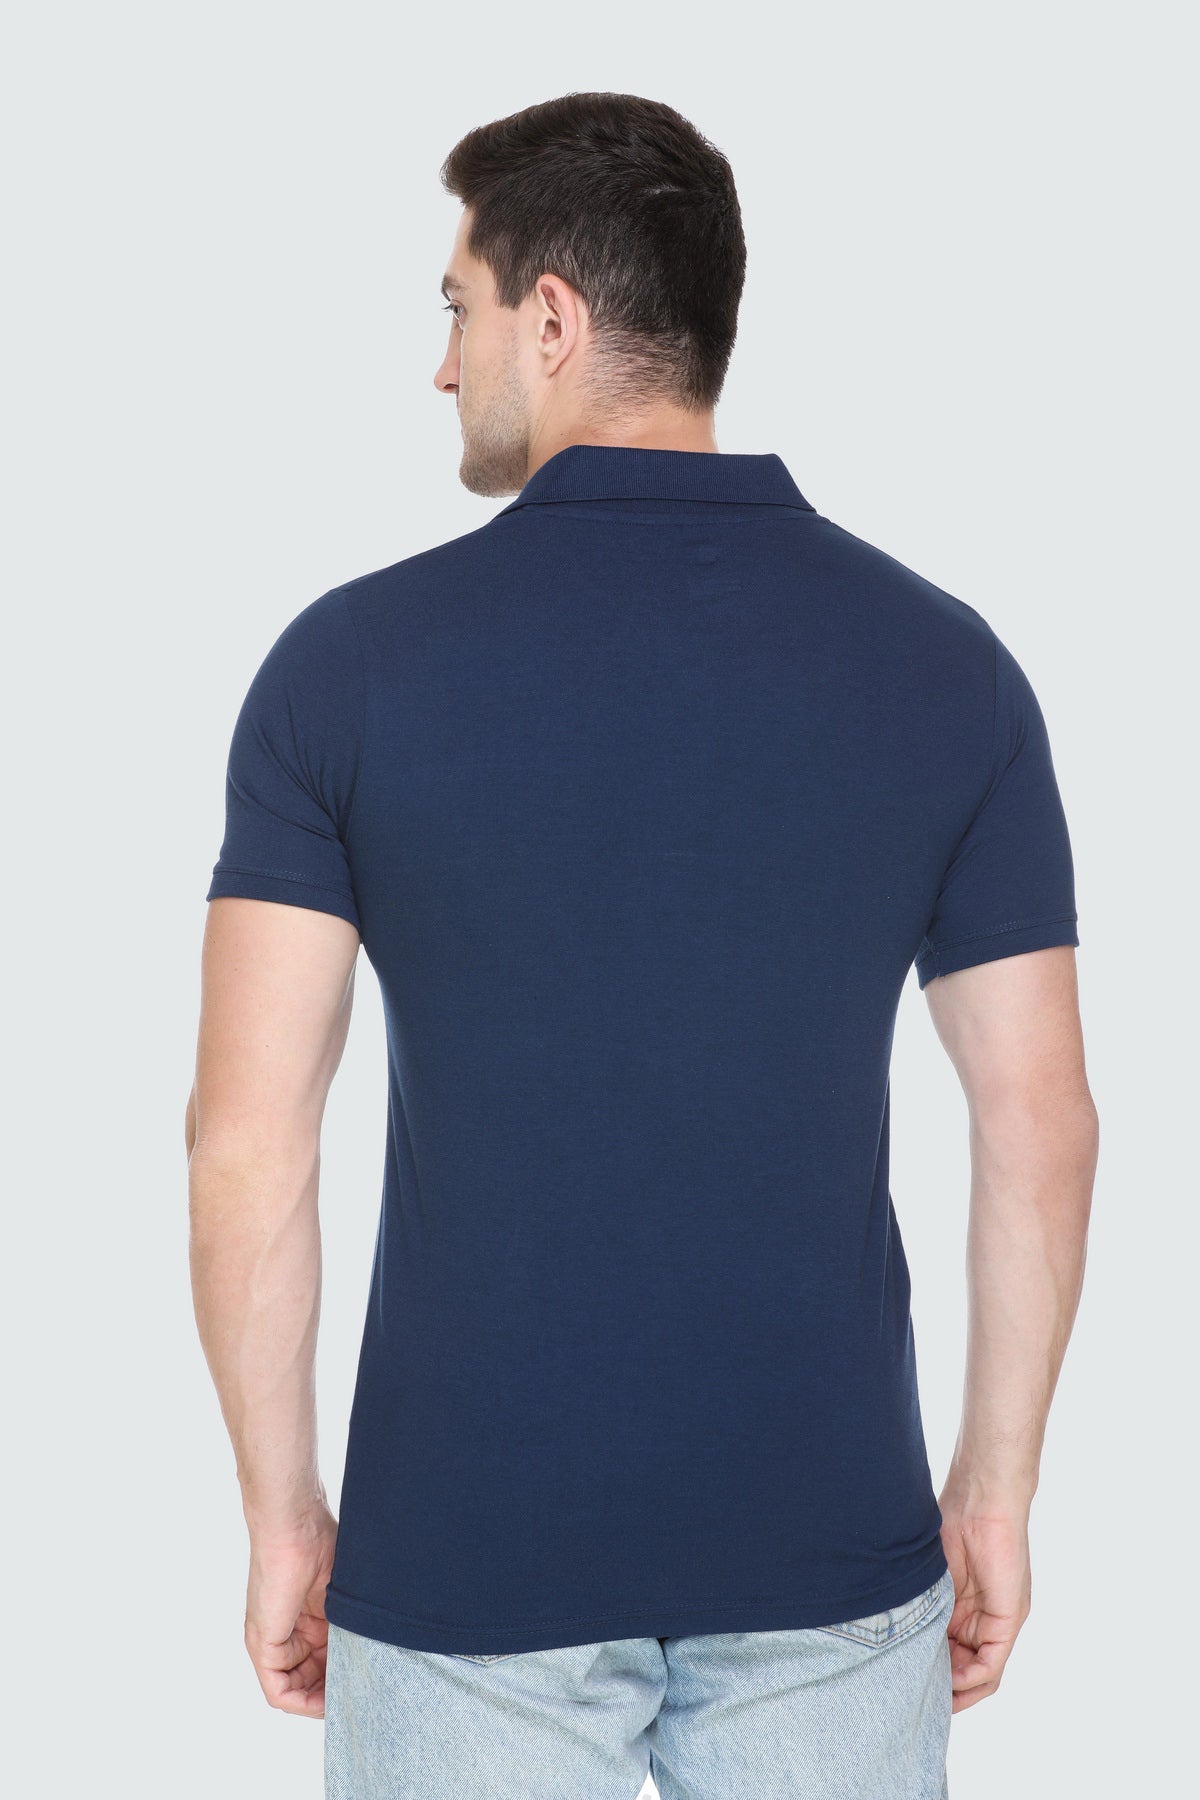 White Moon Cotton Solid Regular Fit Polo Tshirt Men (Navy) whitemoon.in